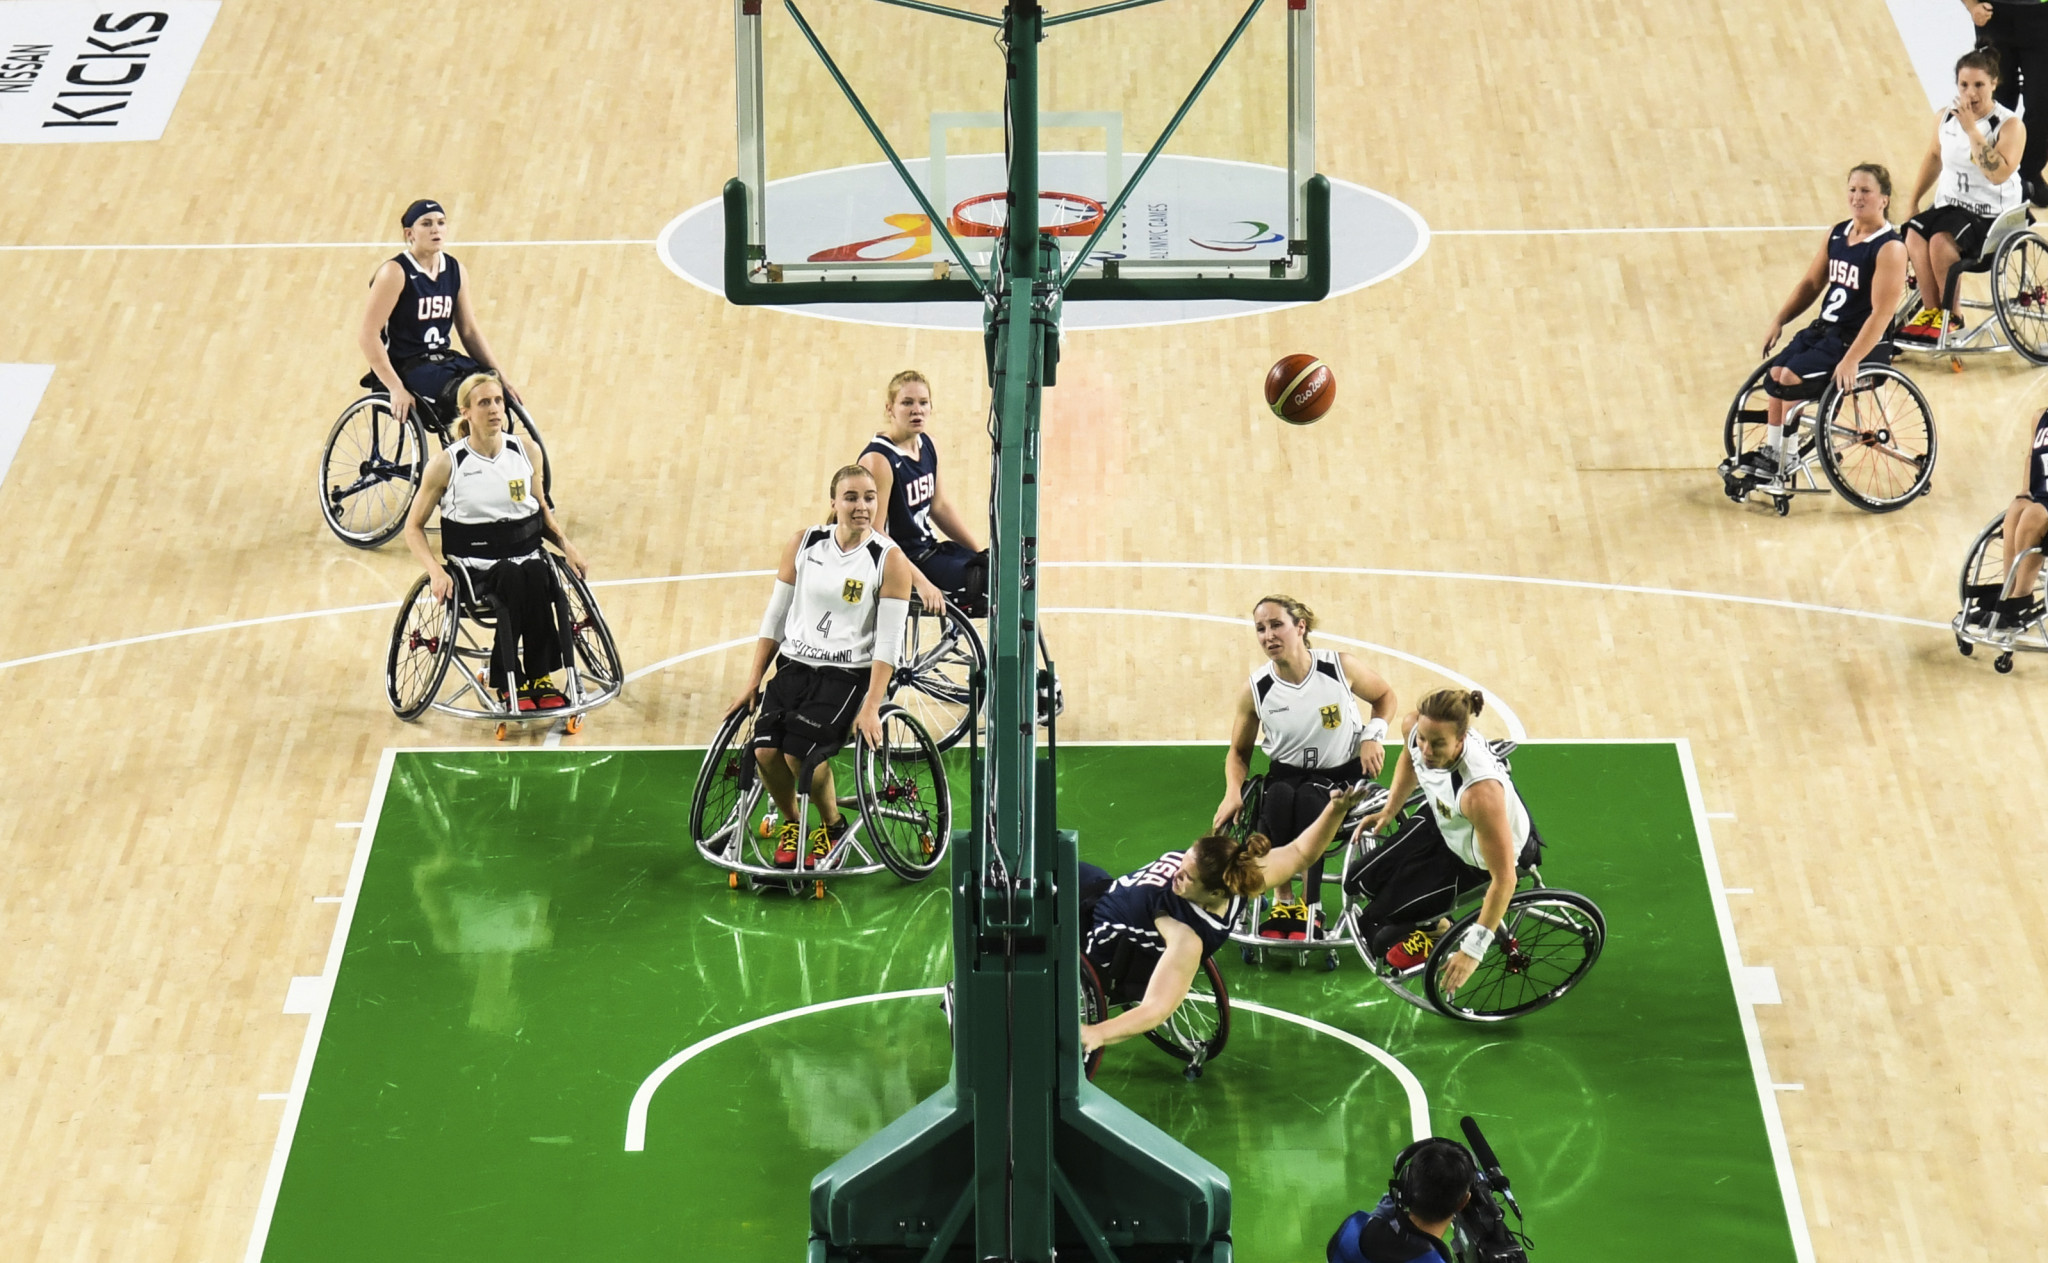 IPC says rules must be followed to ensure competition integrity amid wheelchair basketball dispute